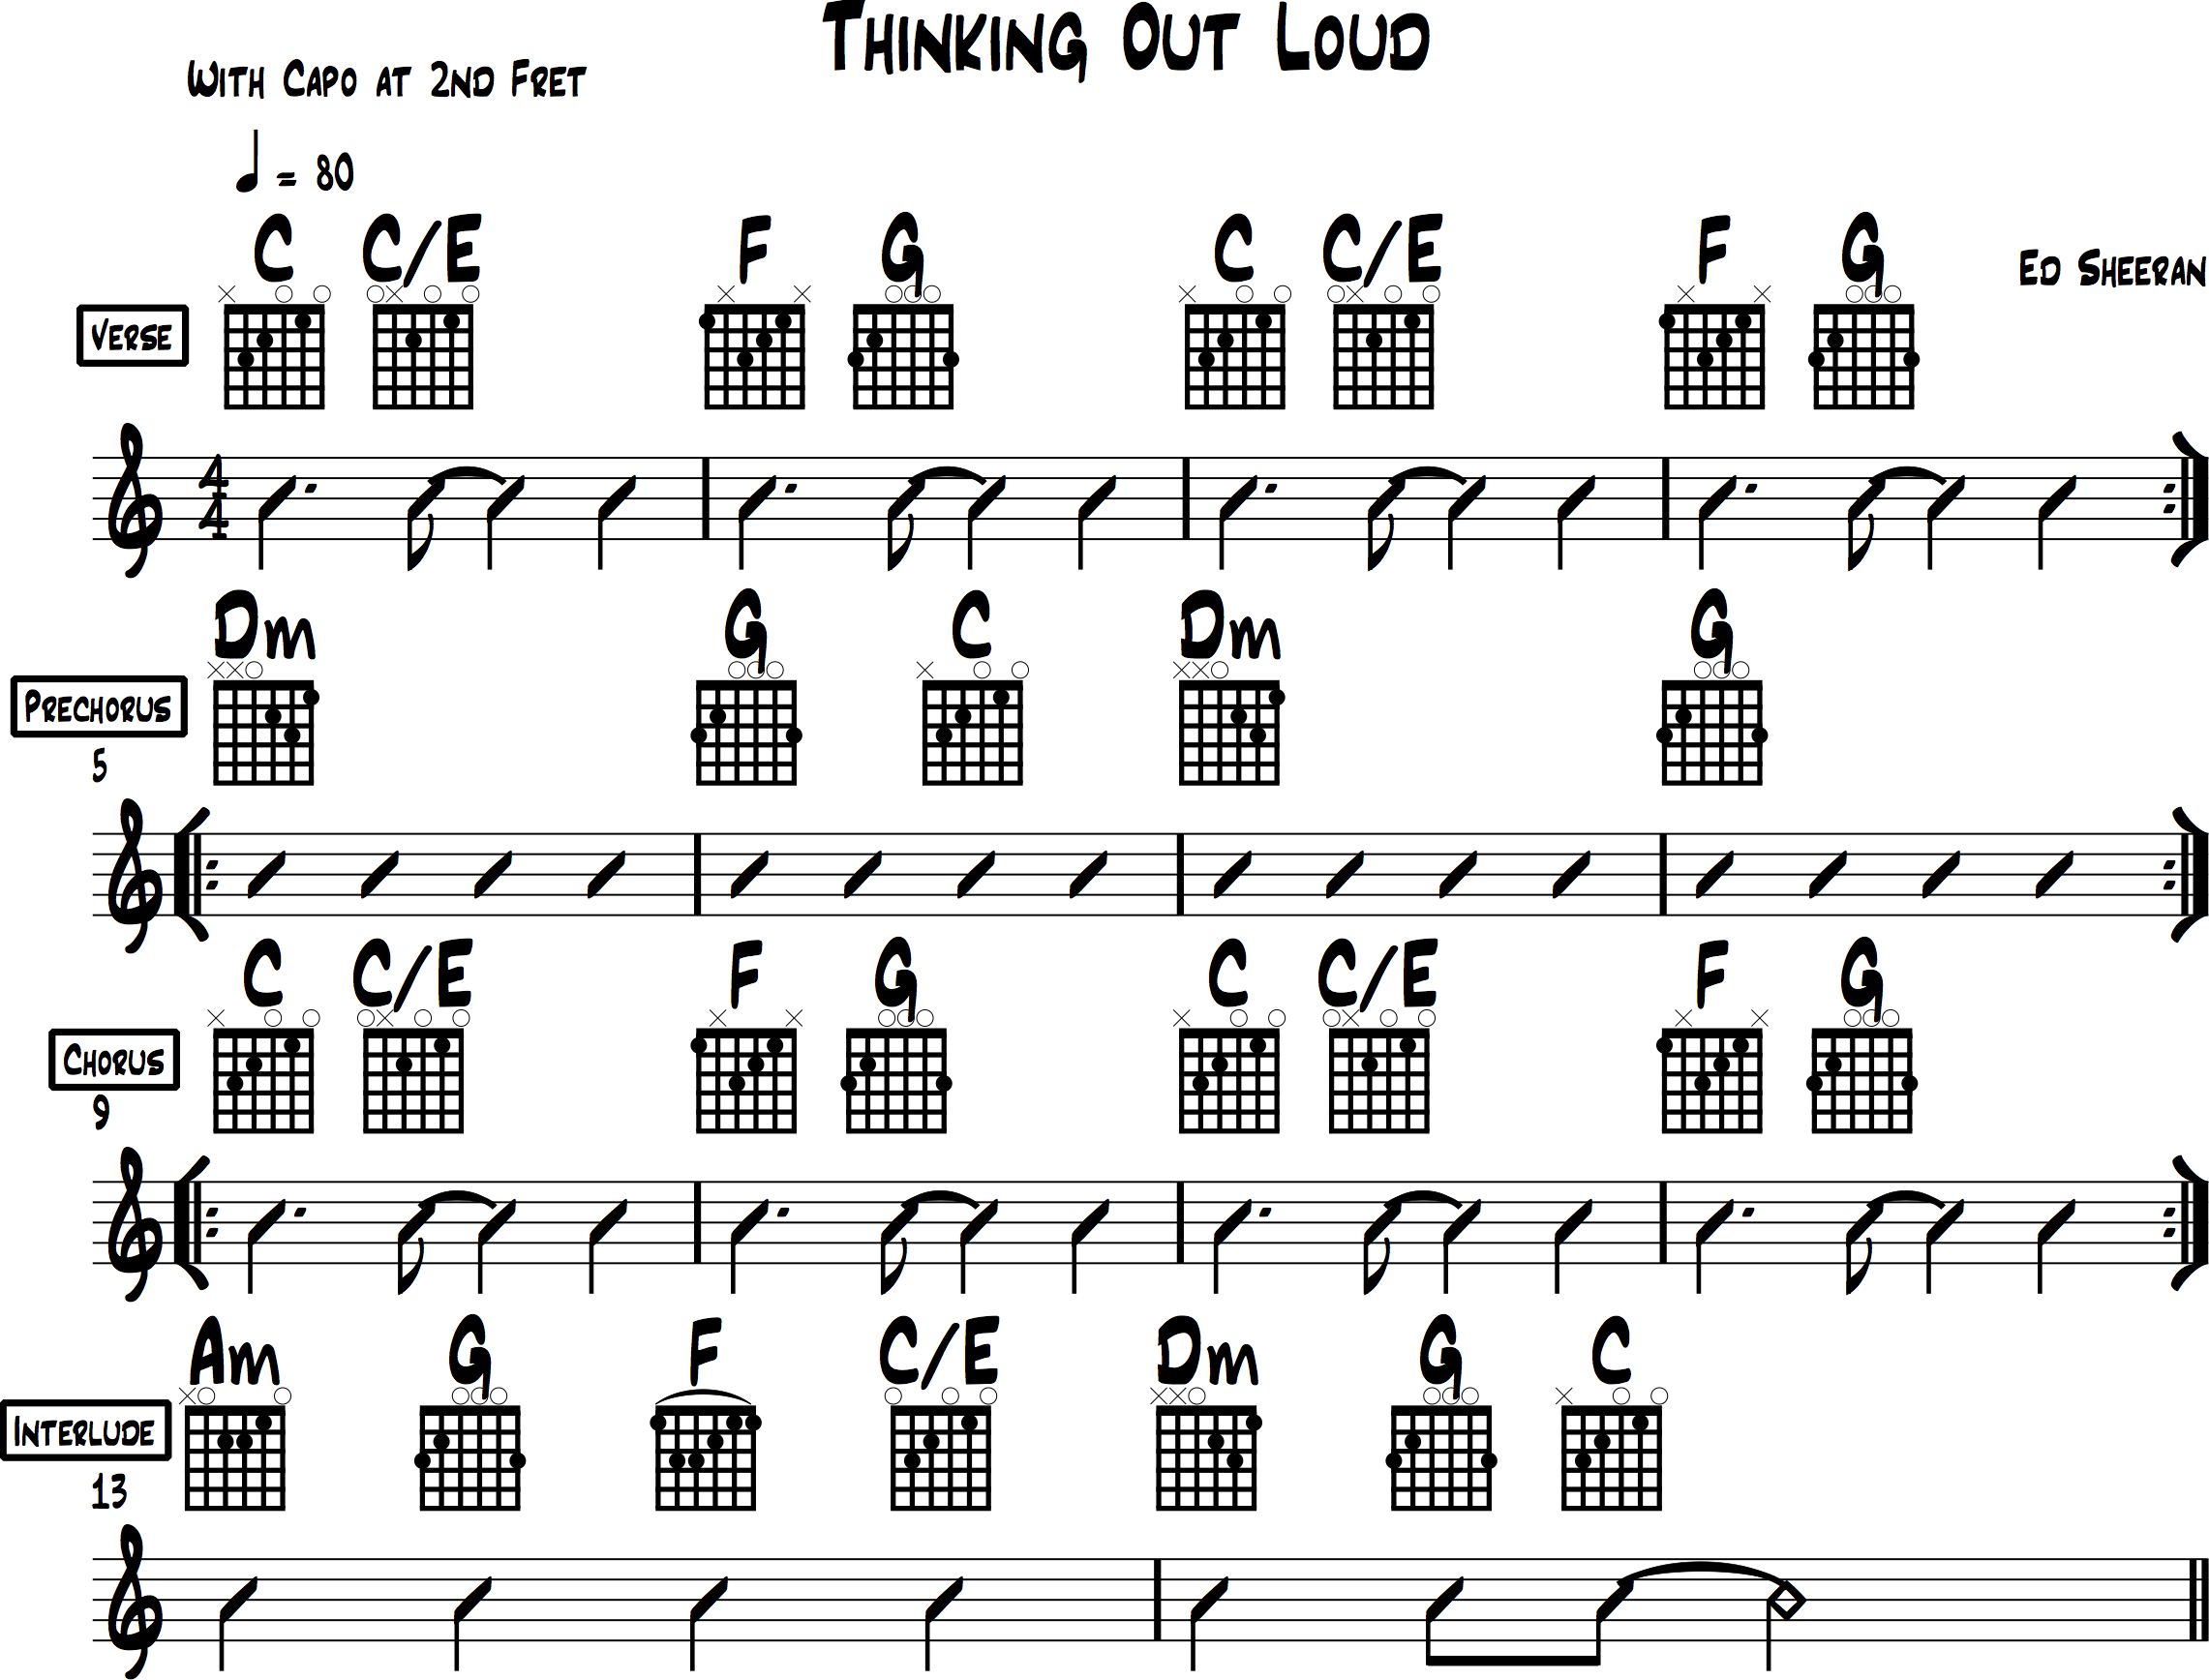 Thinkingi Out Loud chord chart for guitar